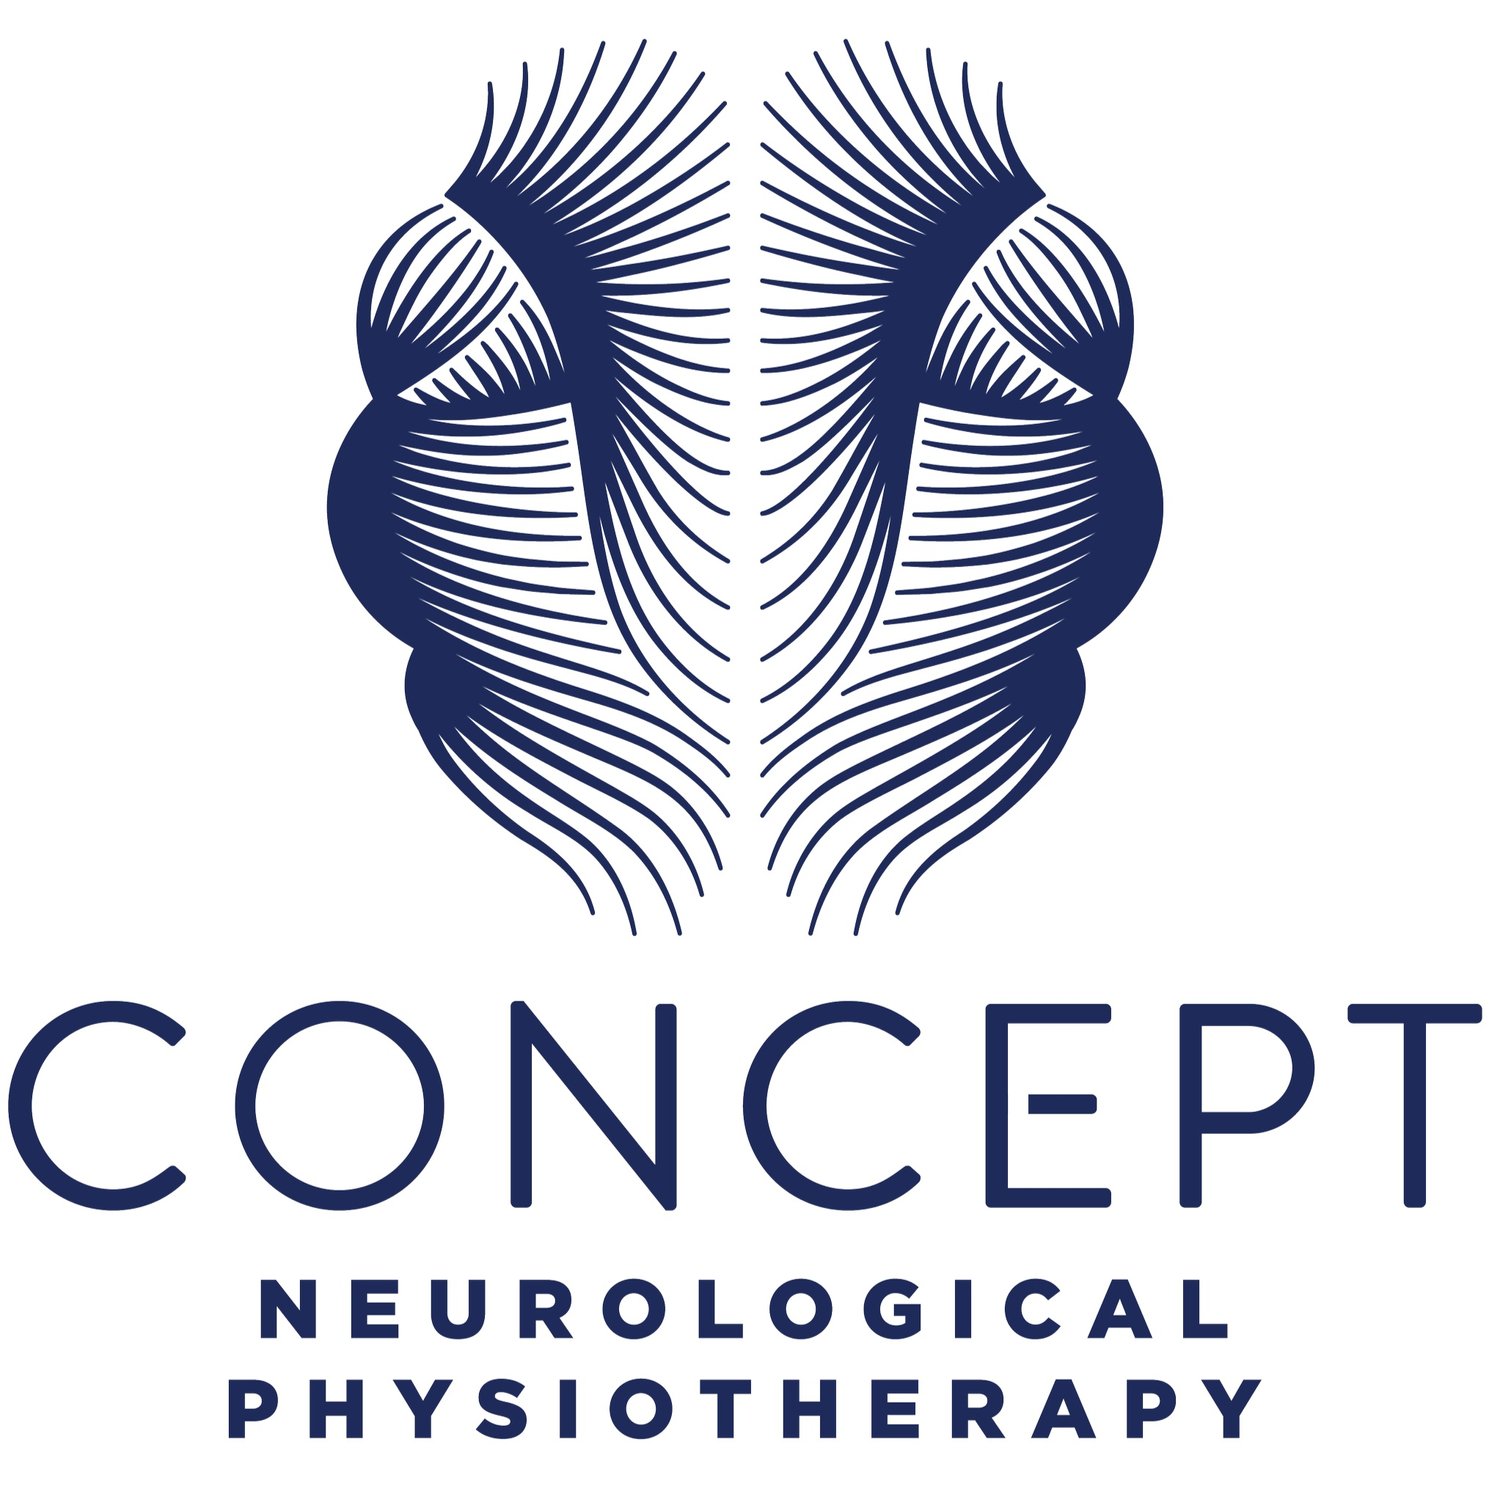 Concept Physiotherapy